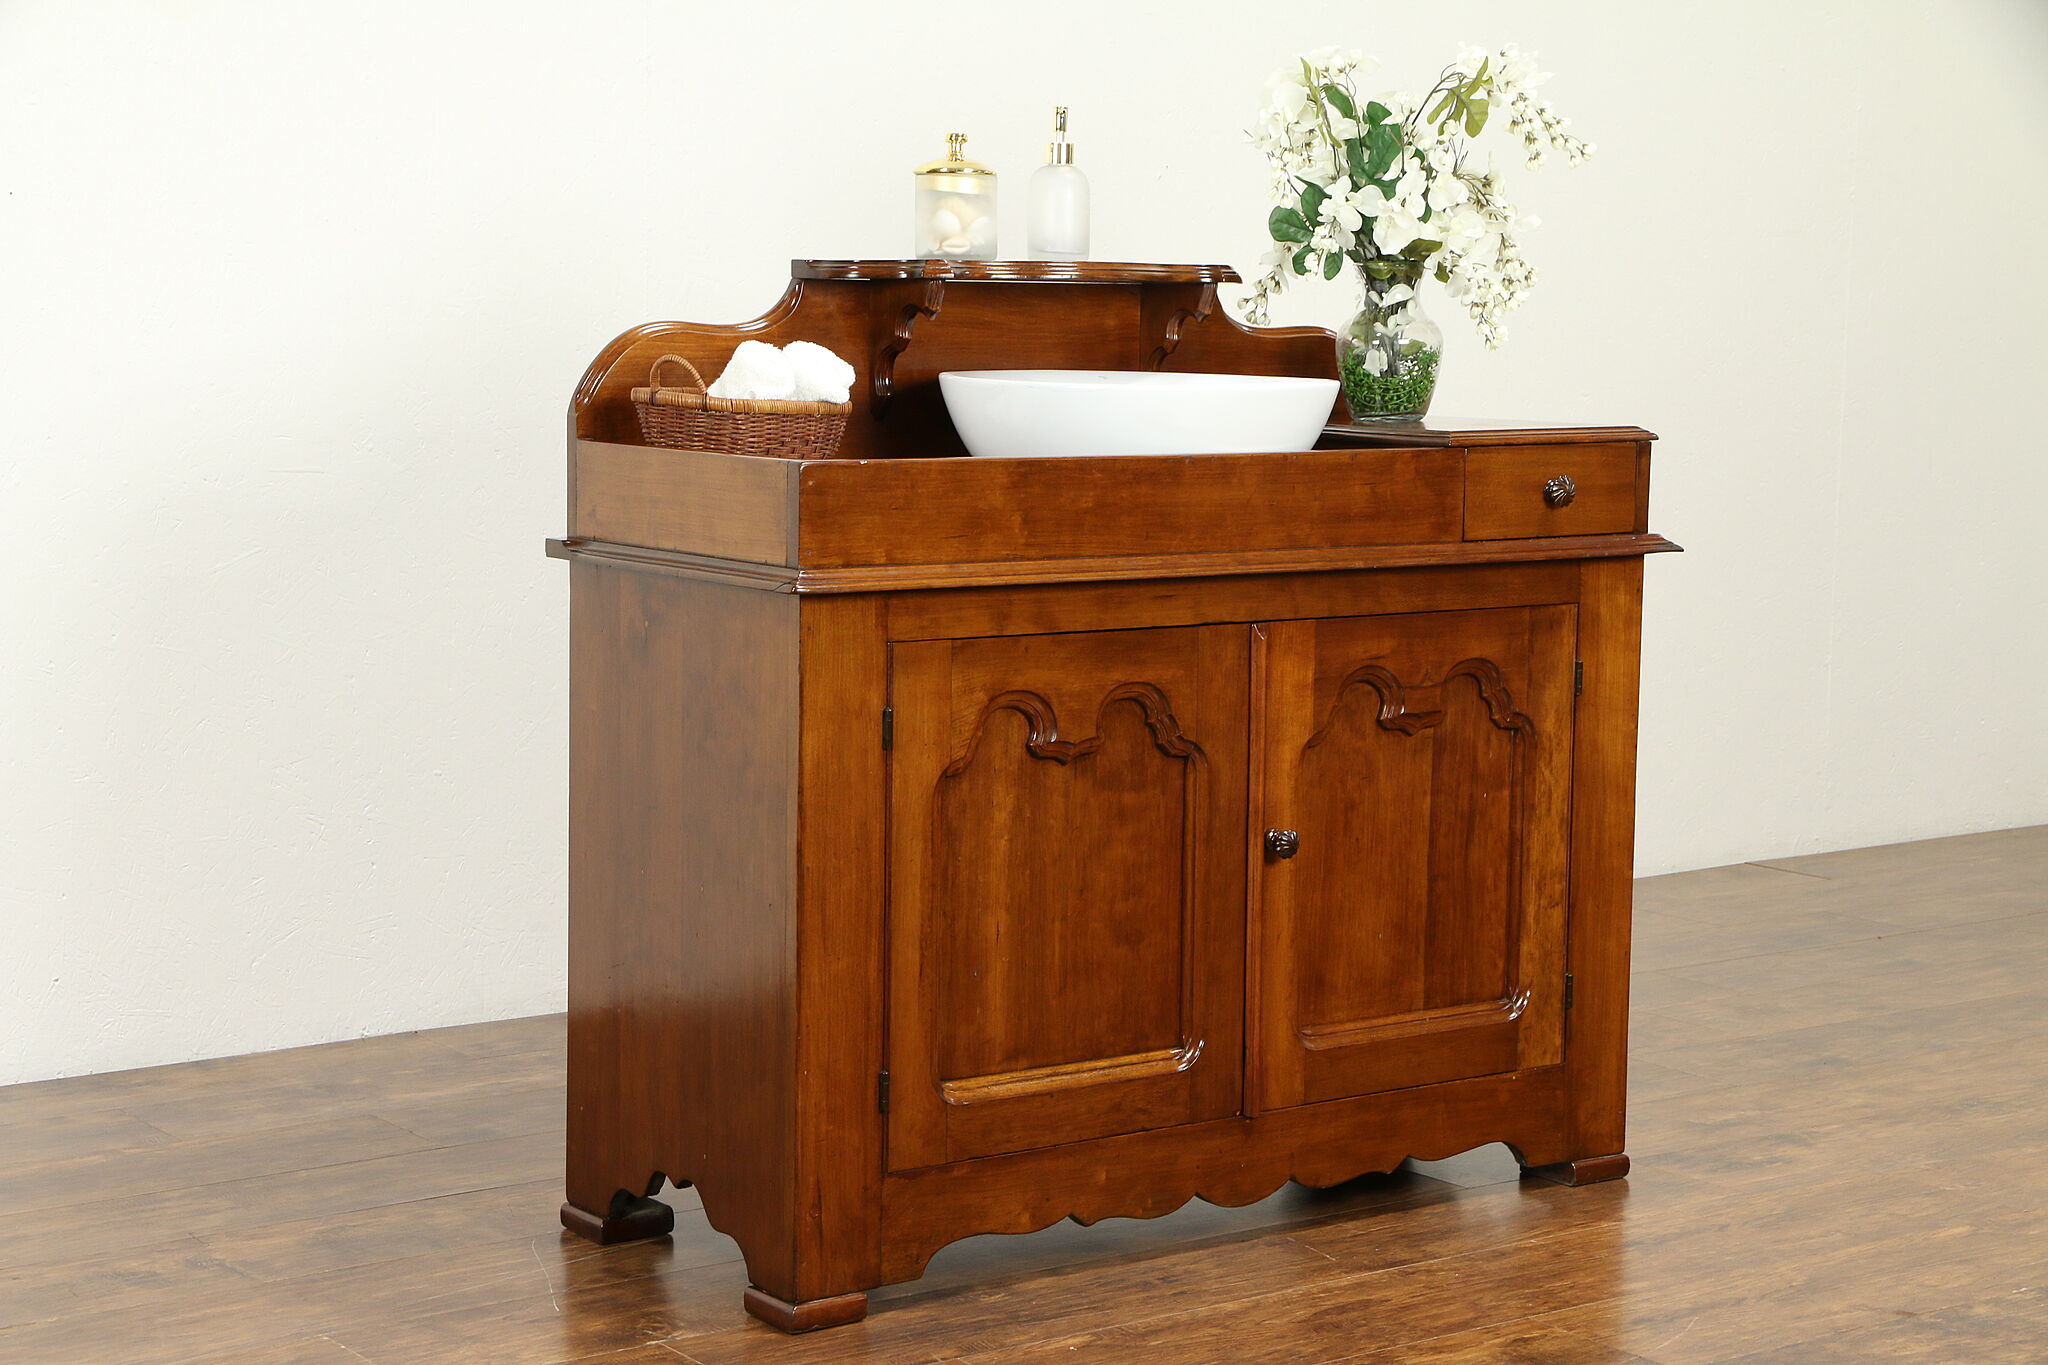 Cherry Antique Dry Sink Vessel Sink Vanity Changing Table 31647